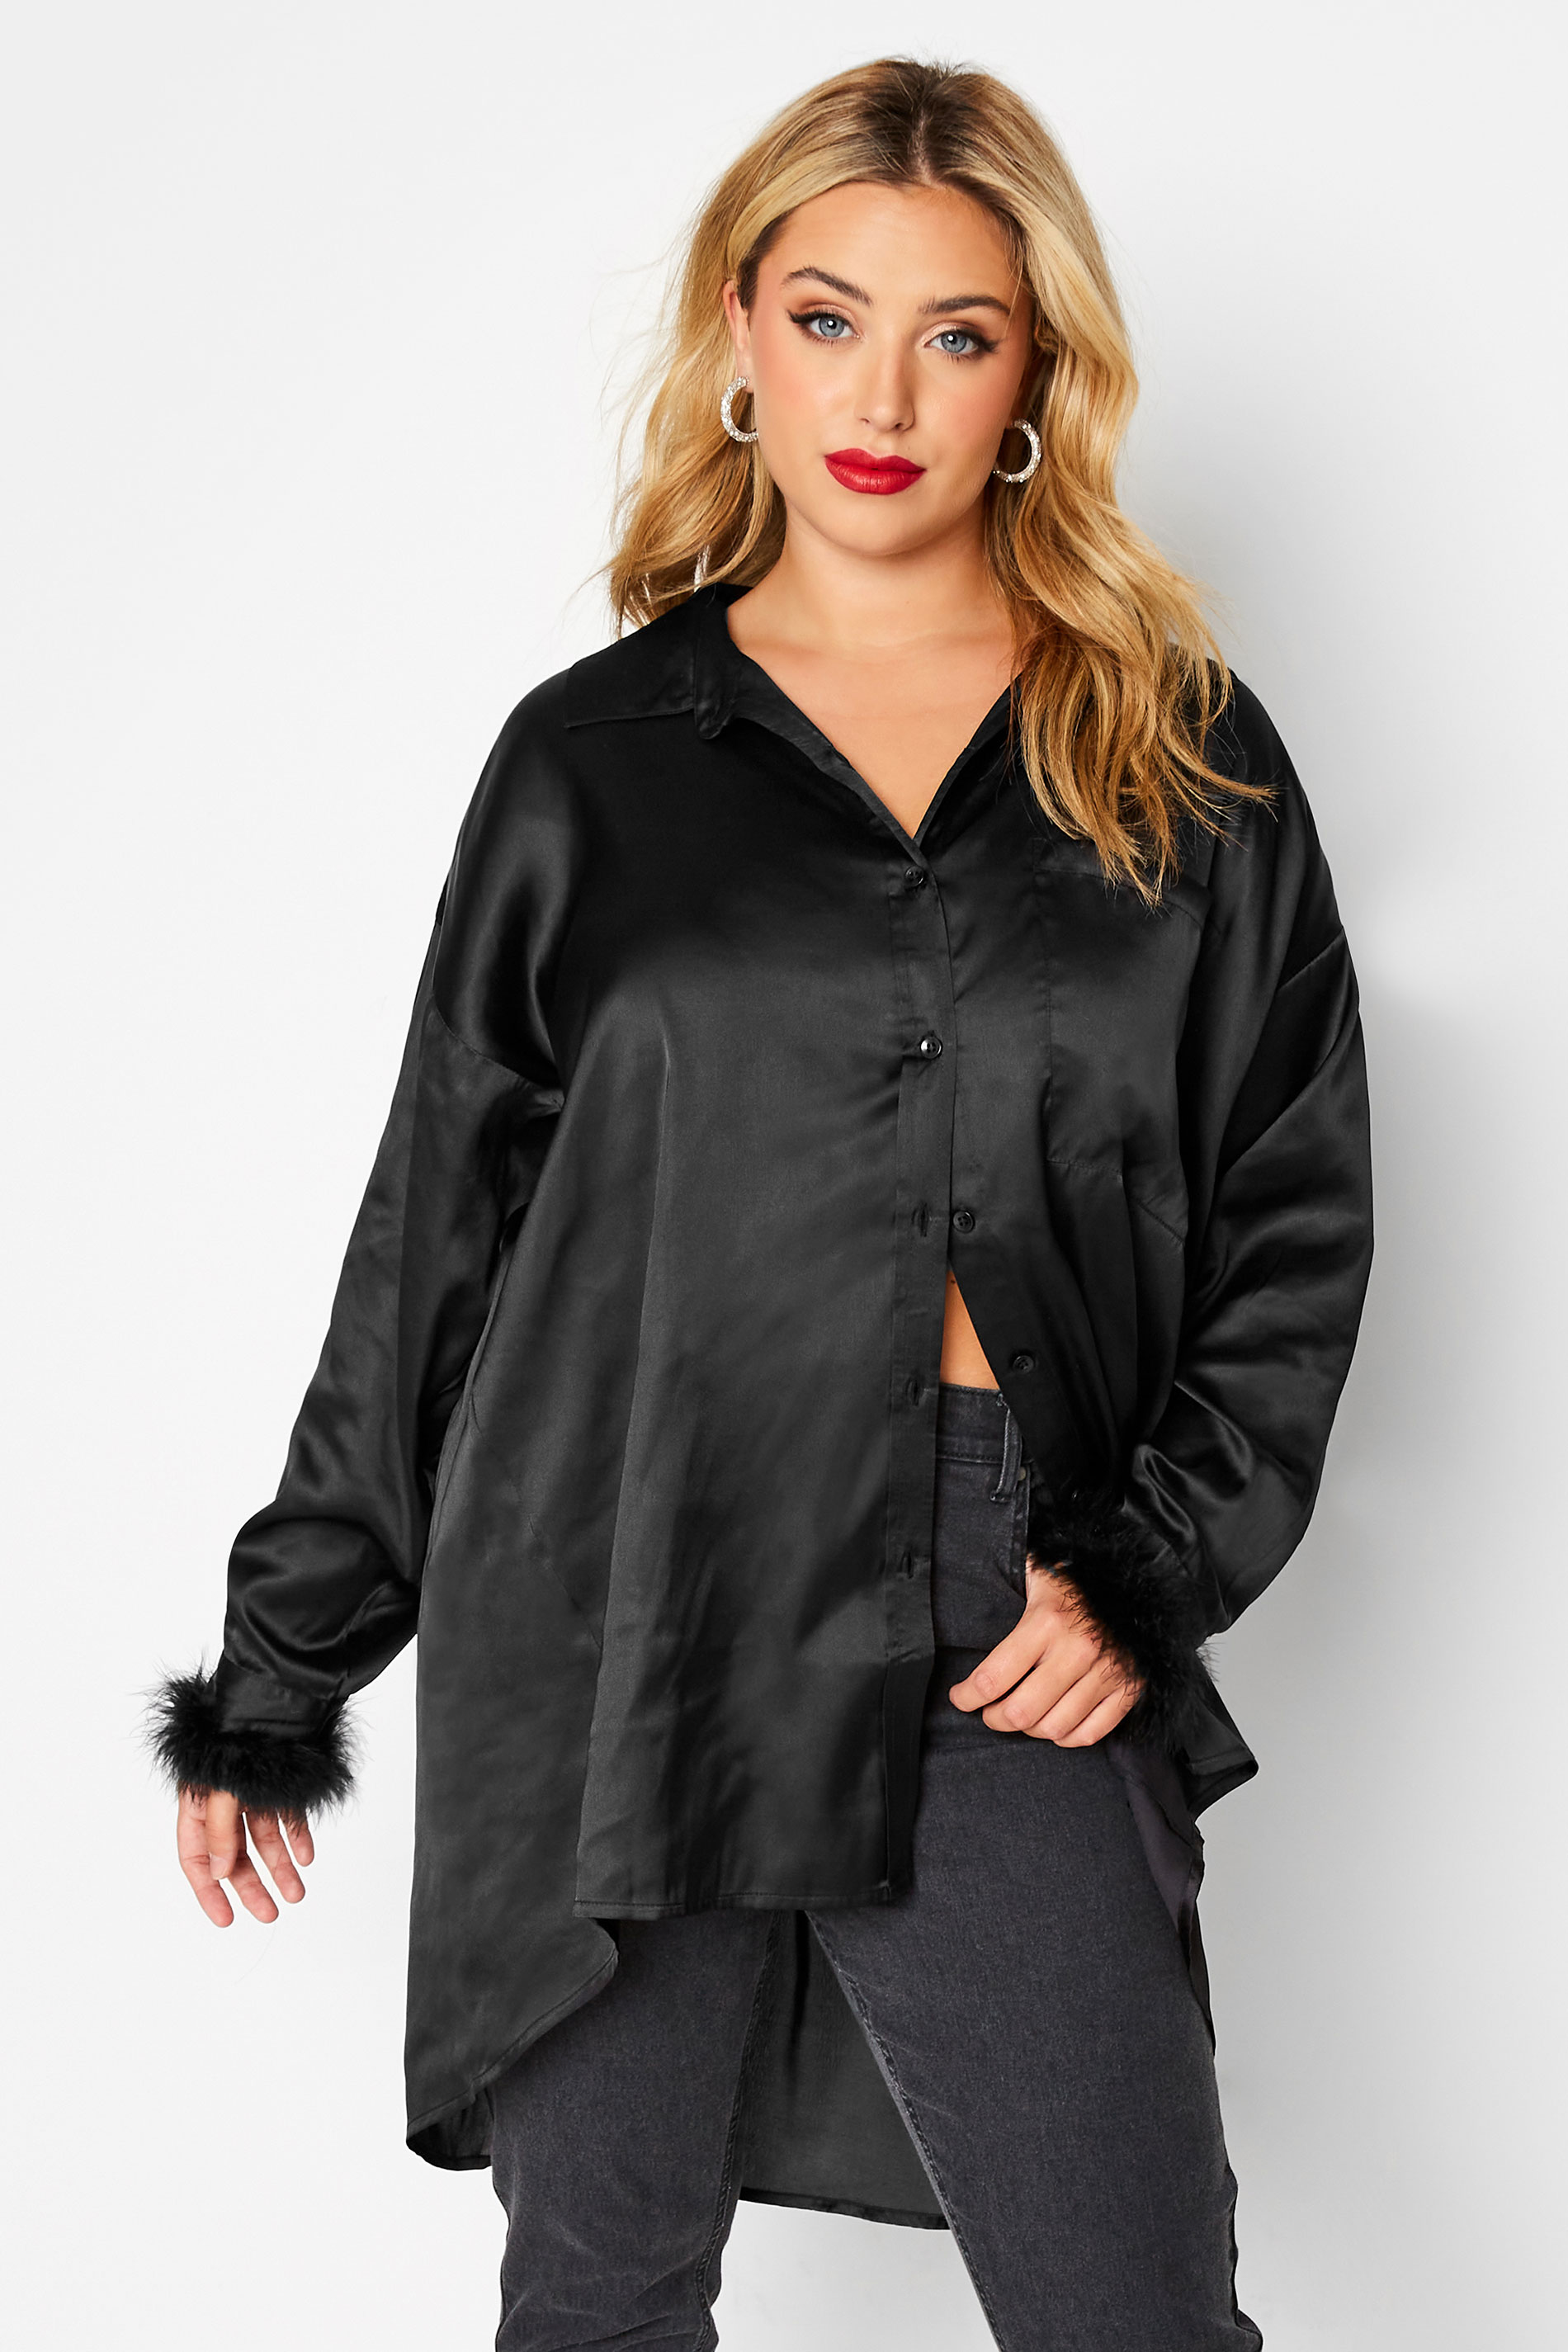 LIMITED COLLECTION Plus Size Black Feather Trim Satin Shirt | Yours Clothing  1